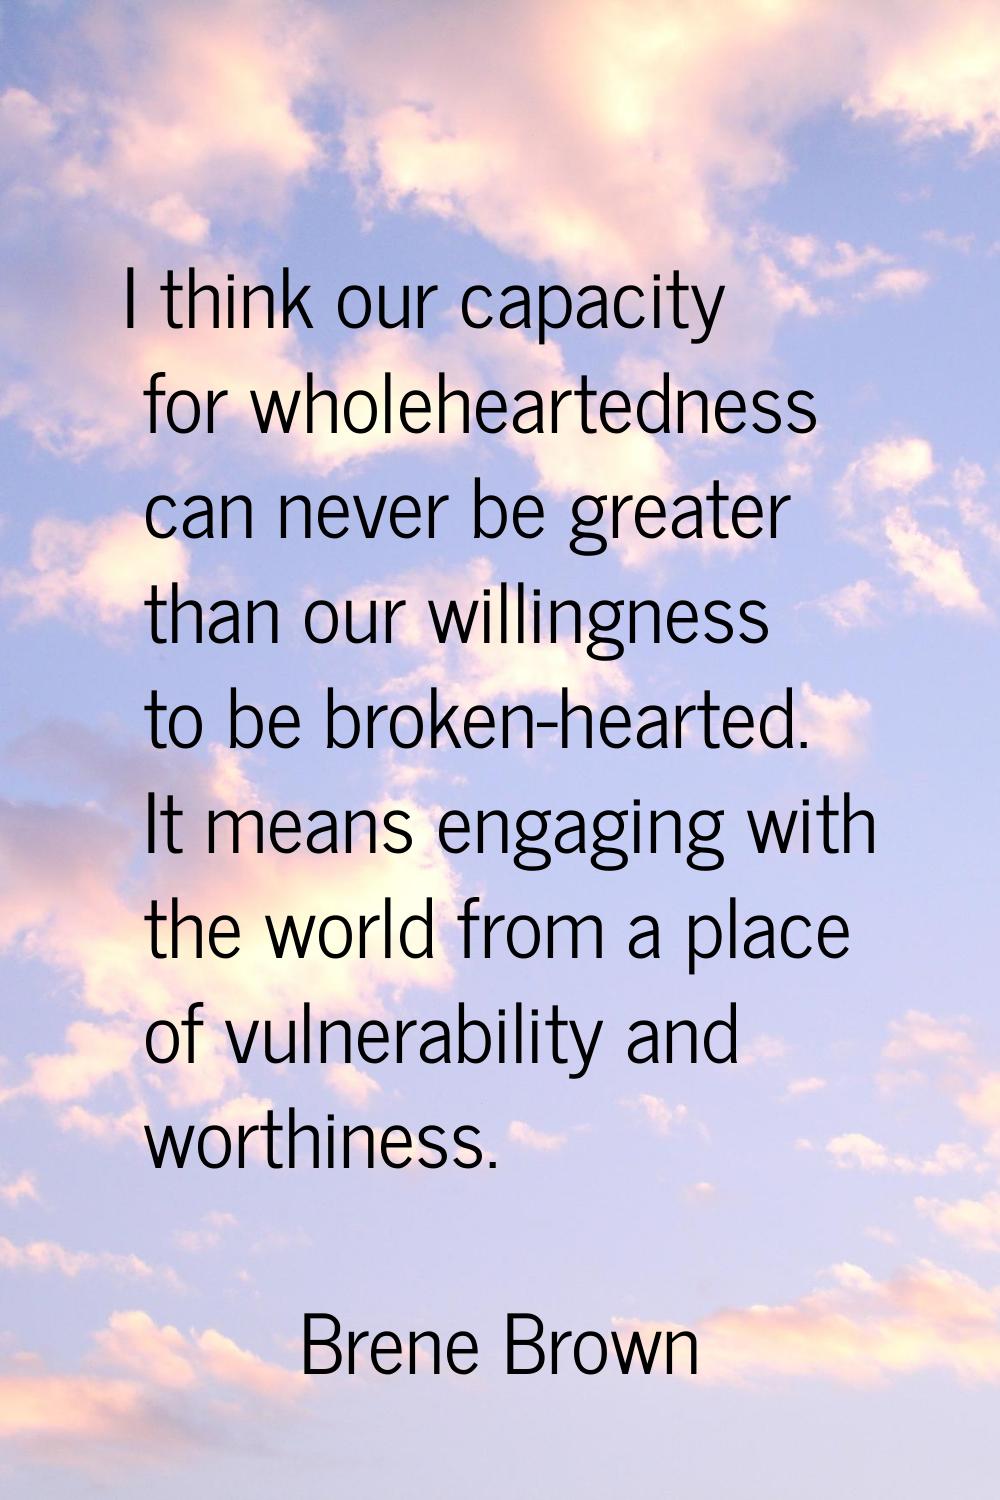 I think our capacity for wholeheartedness can never be greater than our willingness to be broken-he